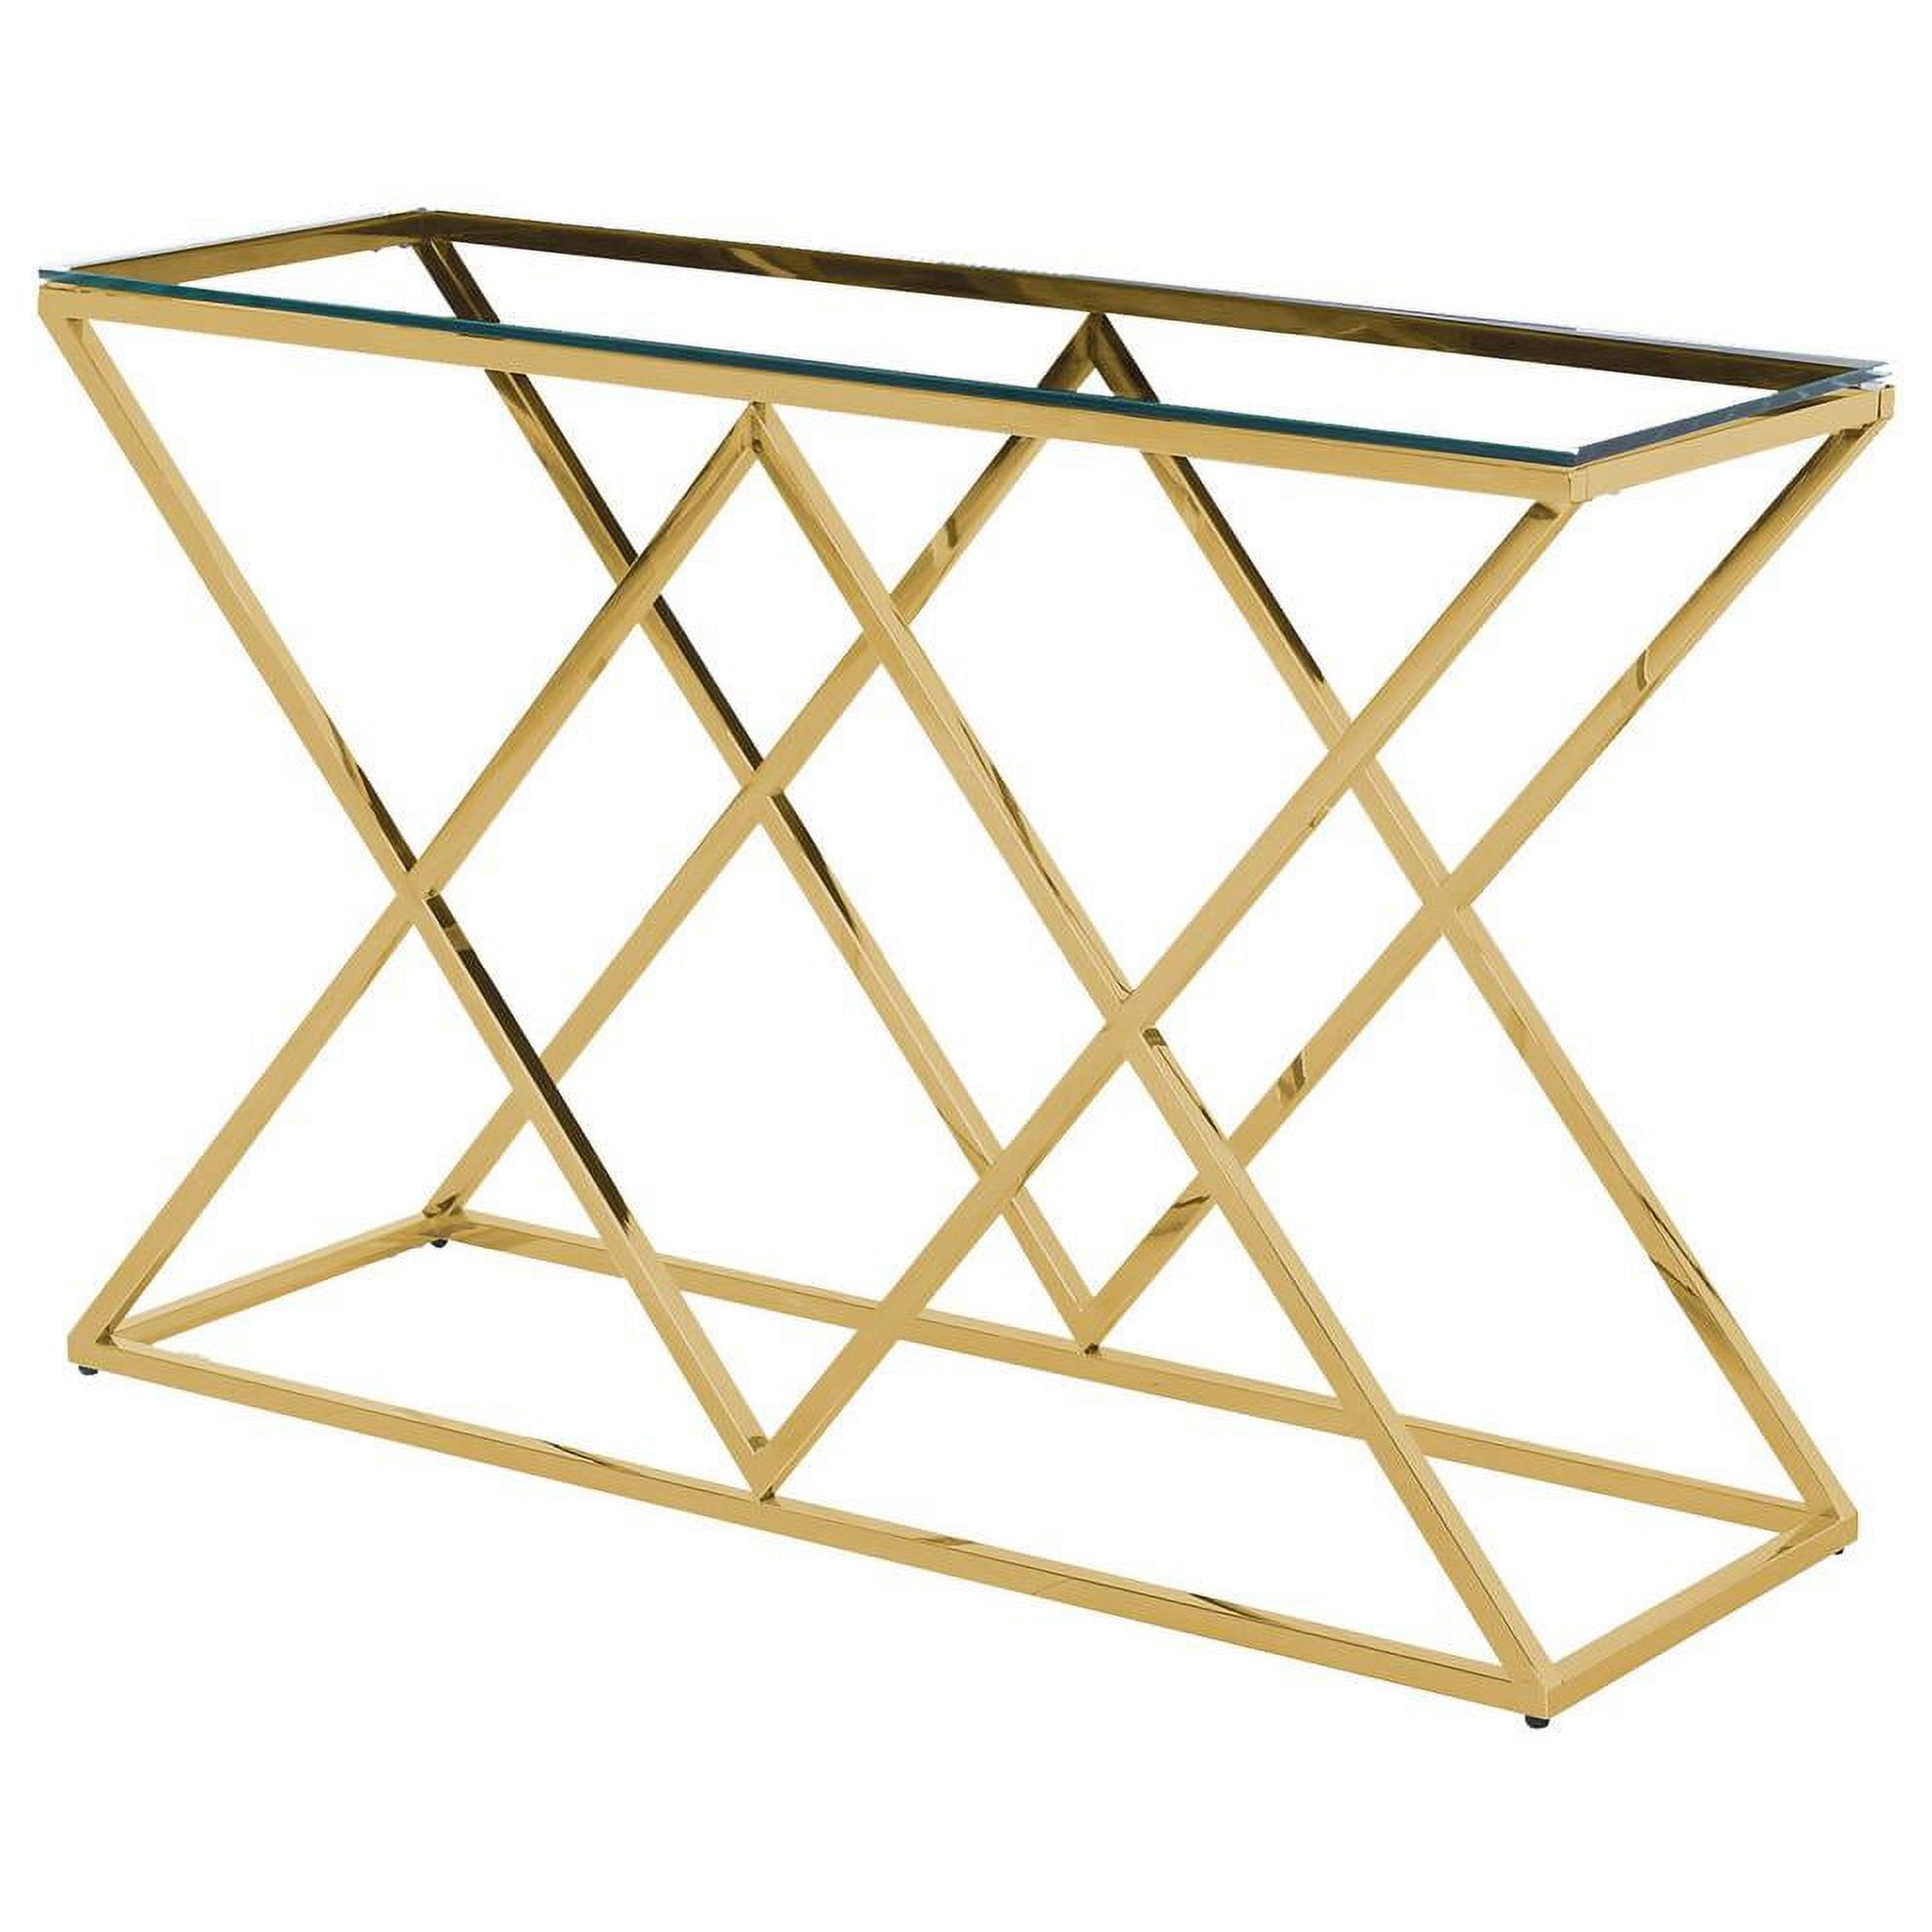 E49 Gold Sofa Table Angled Stainless Steel Clear Glass Sofa Table, Gold